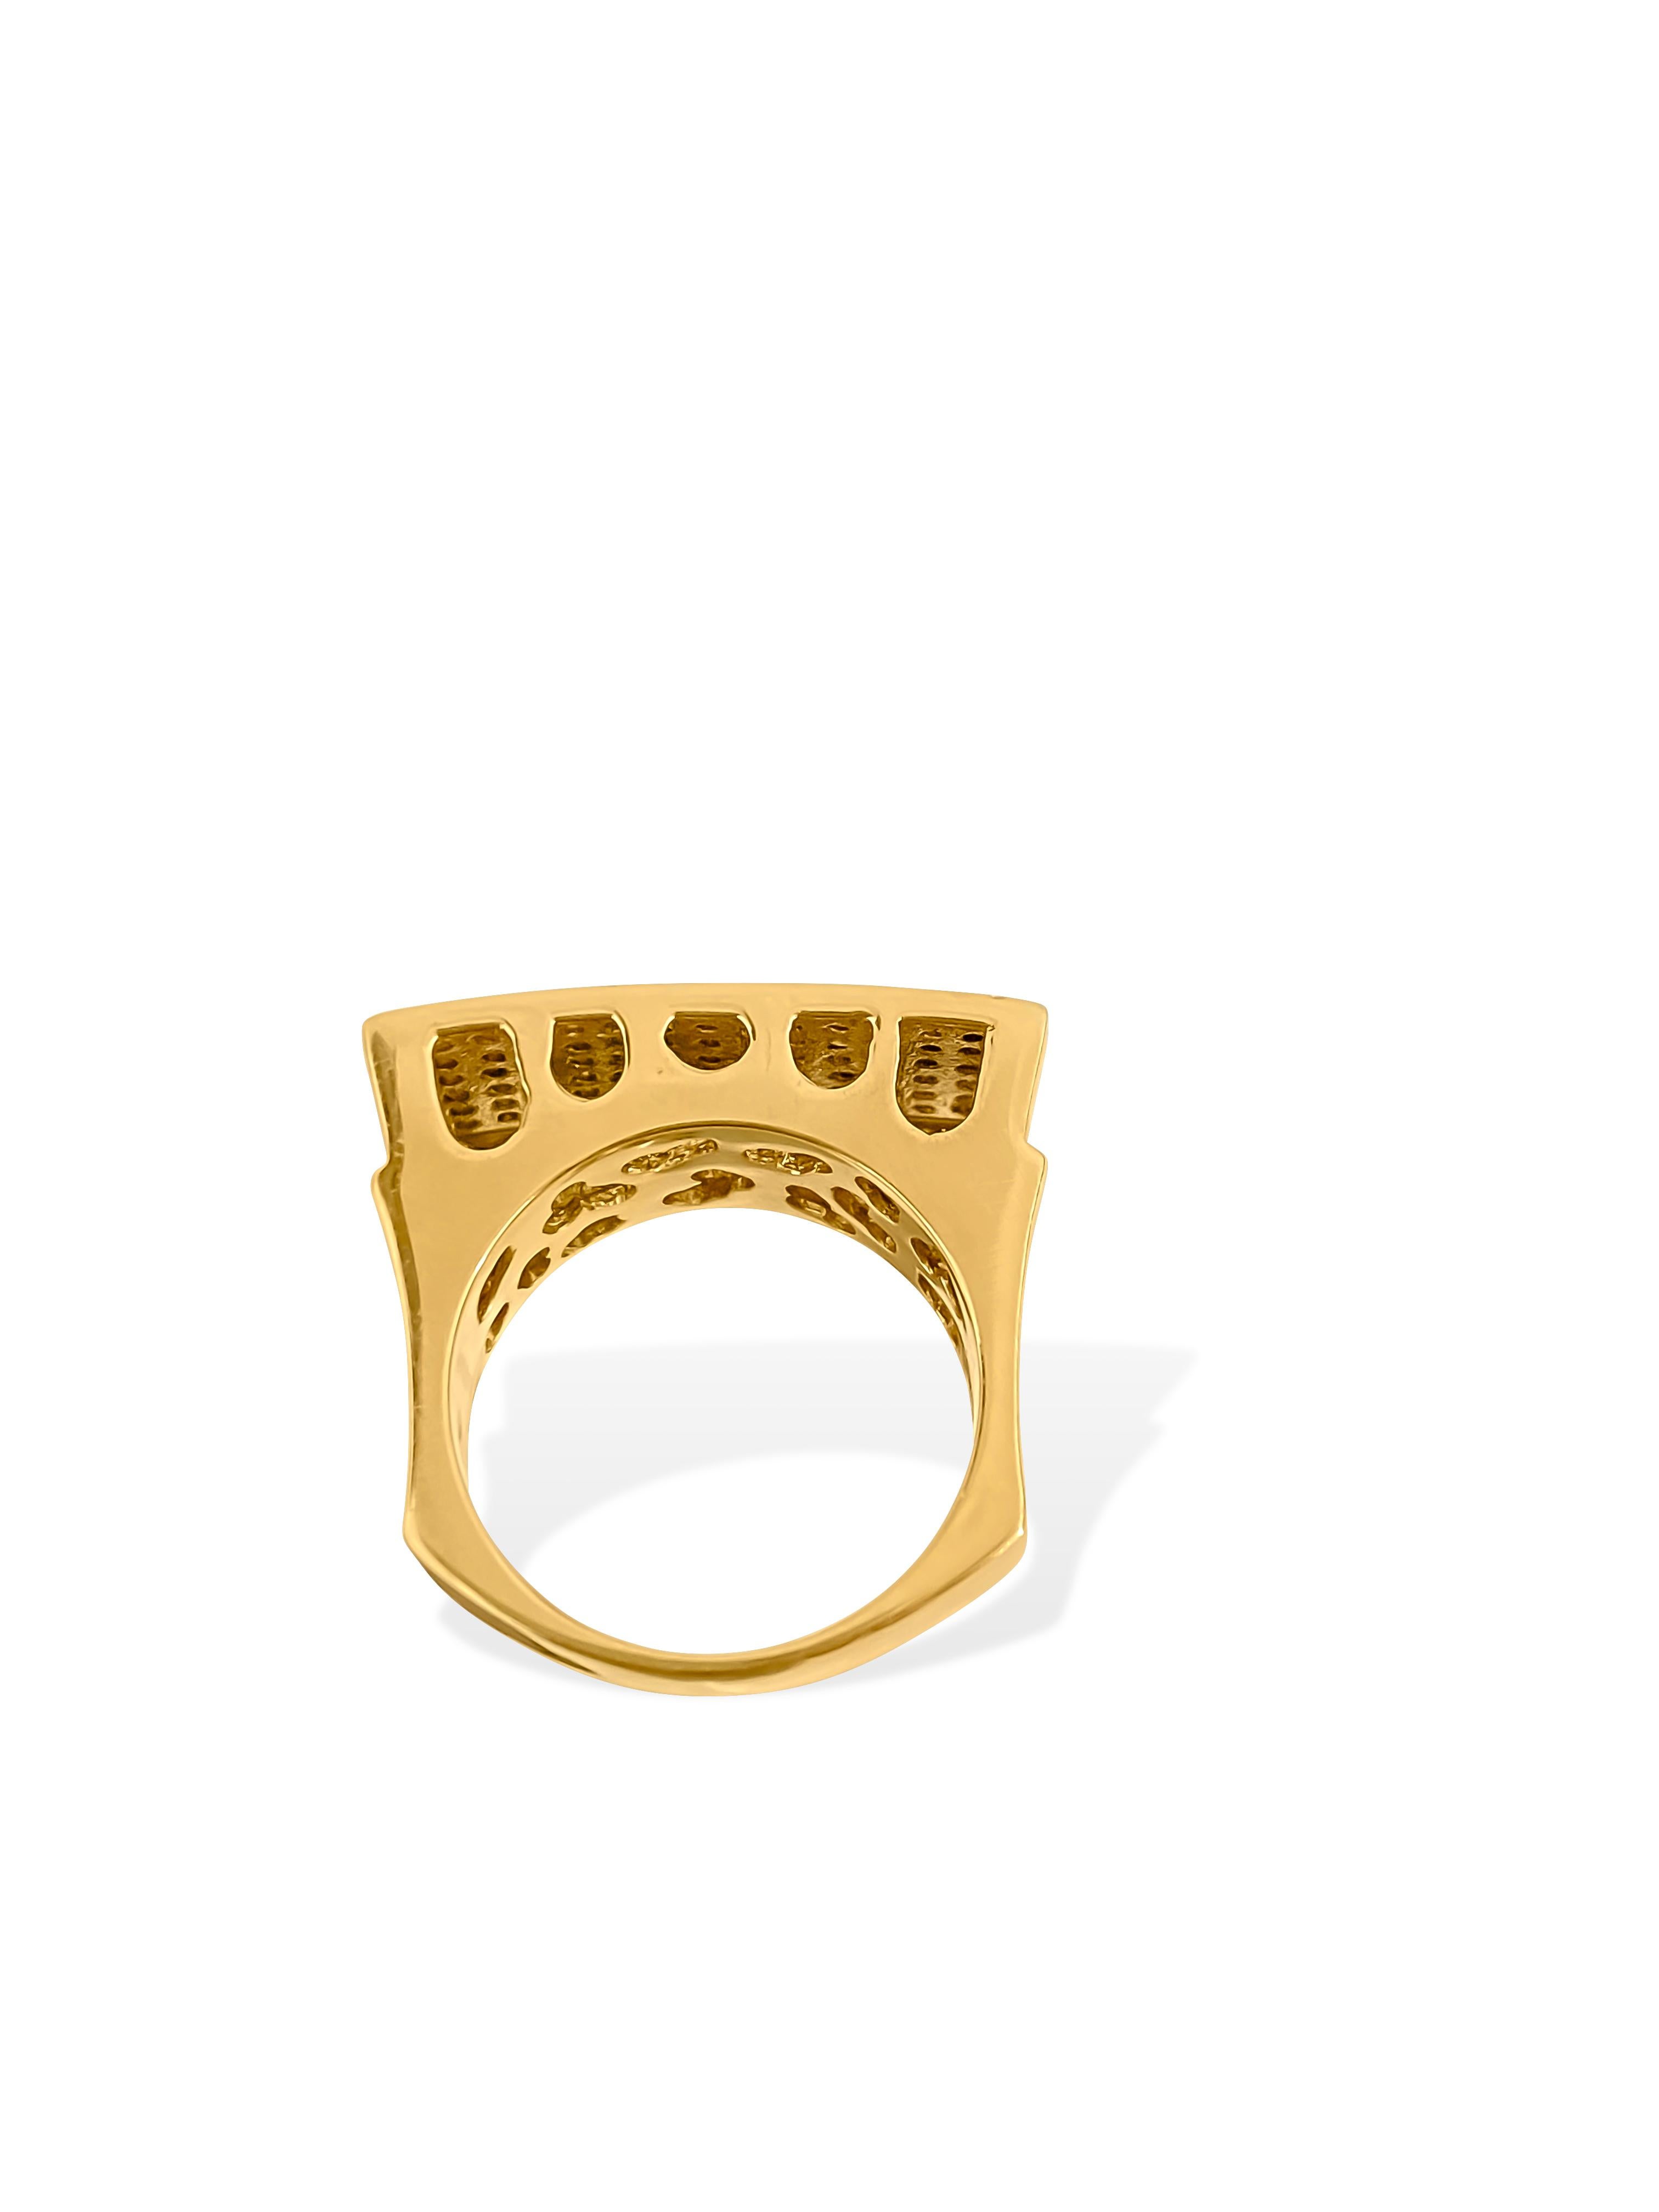 In 18K yellow gold, this custom-made men's ring boasts a total carat weight of 3.00 carats of white diamonds, each exhibiting VS-SI clarity and F color. Set in a bead setting, these round brilliant cut diamonds radiate brilliance and elegance. With